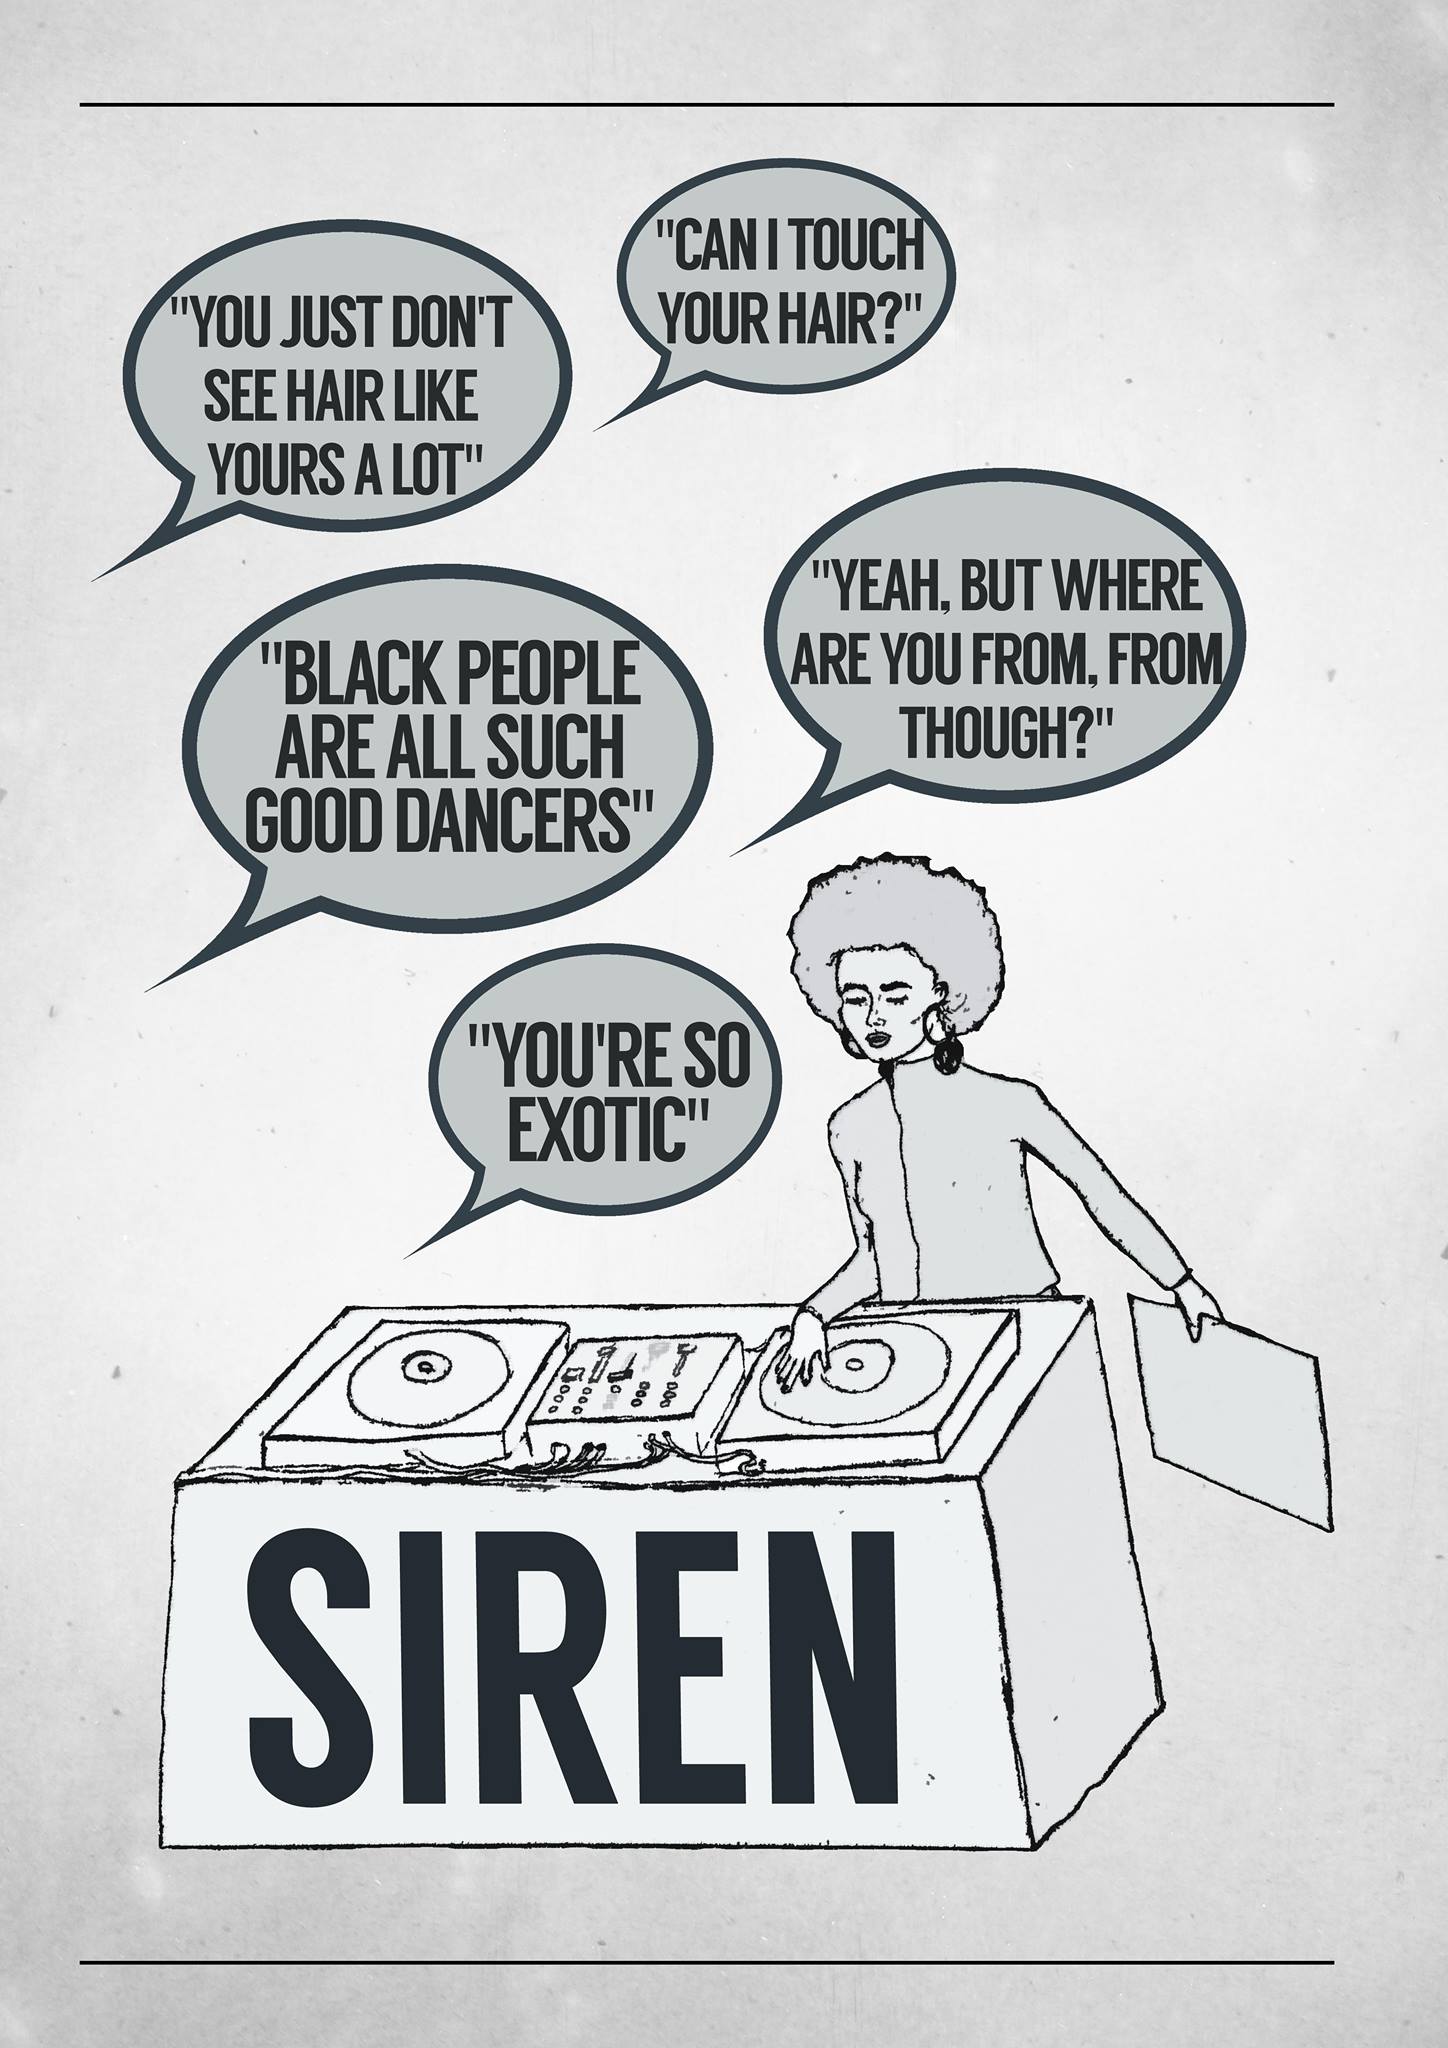 SIREN: changing the face of white, male, cisgender dance music